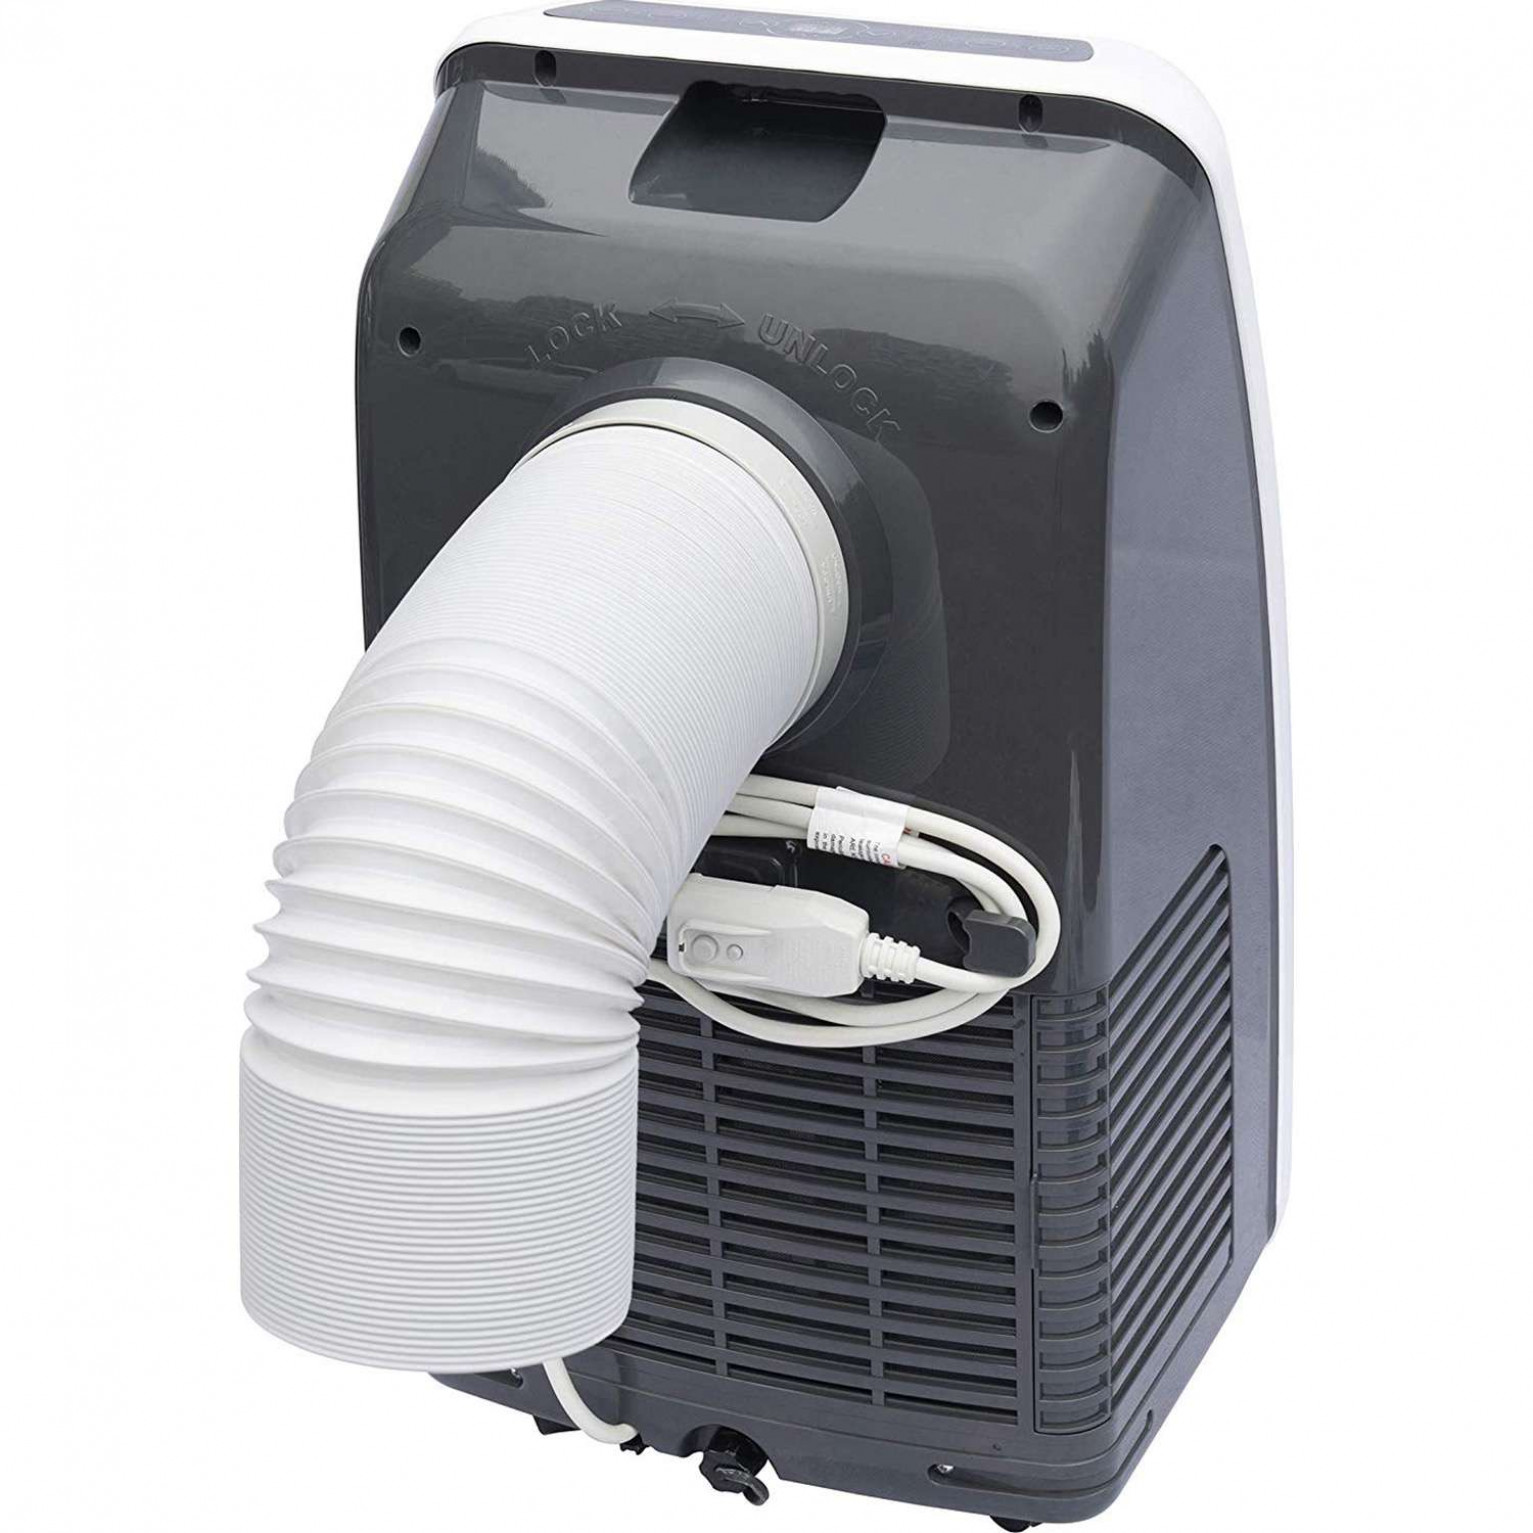 Portable Ac Unit For Room